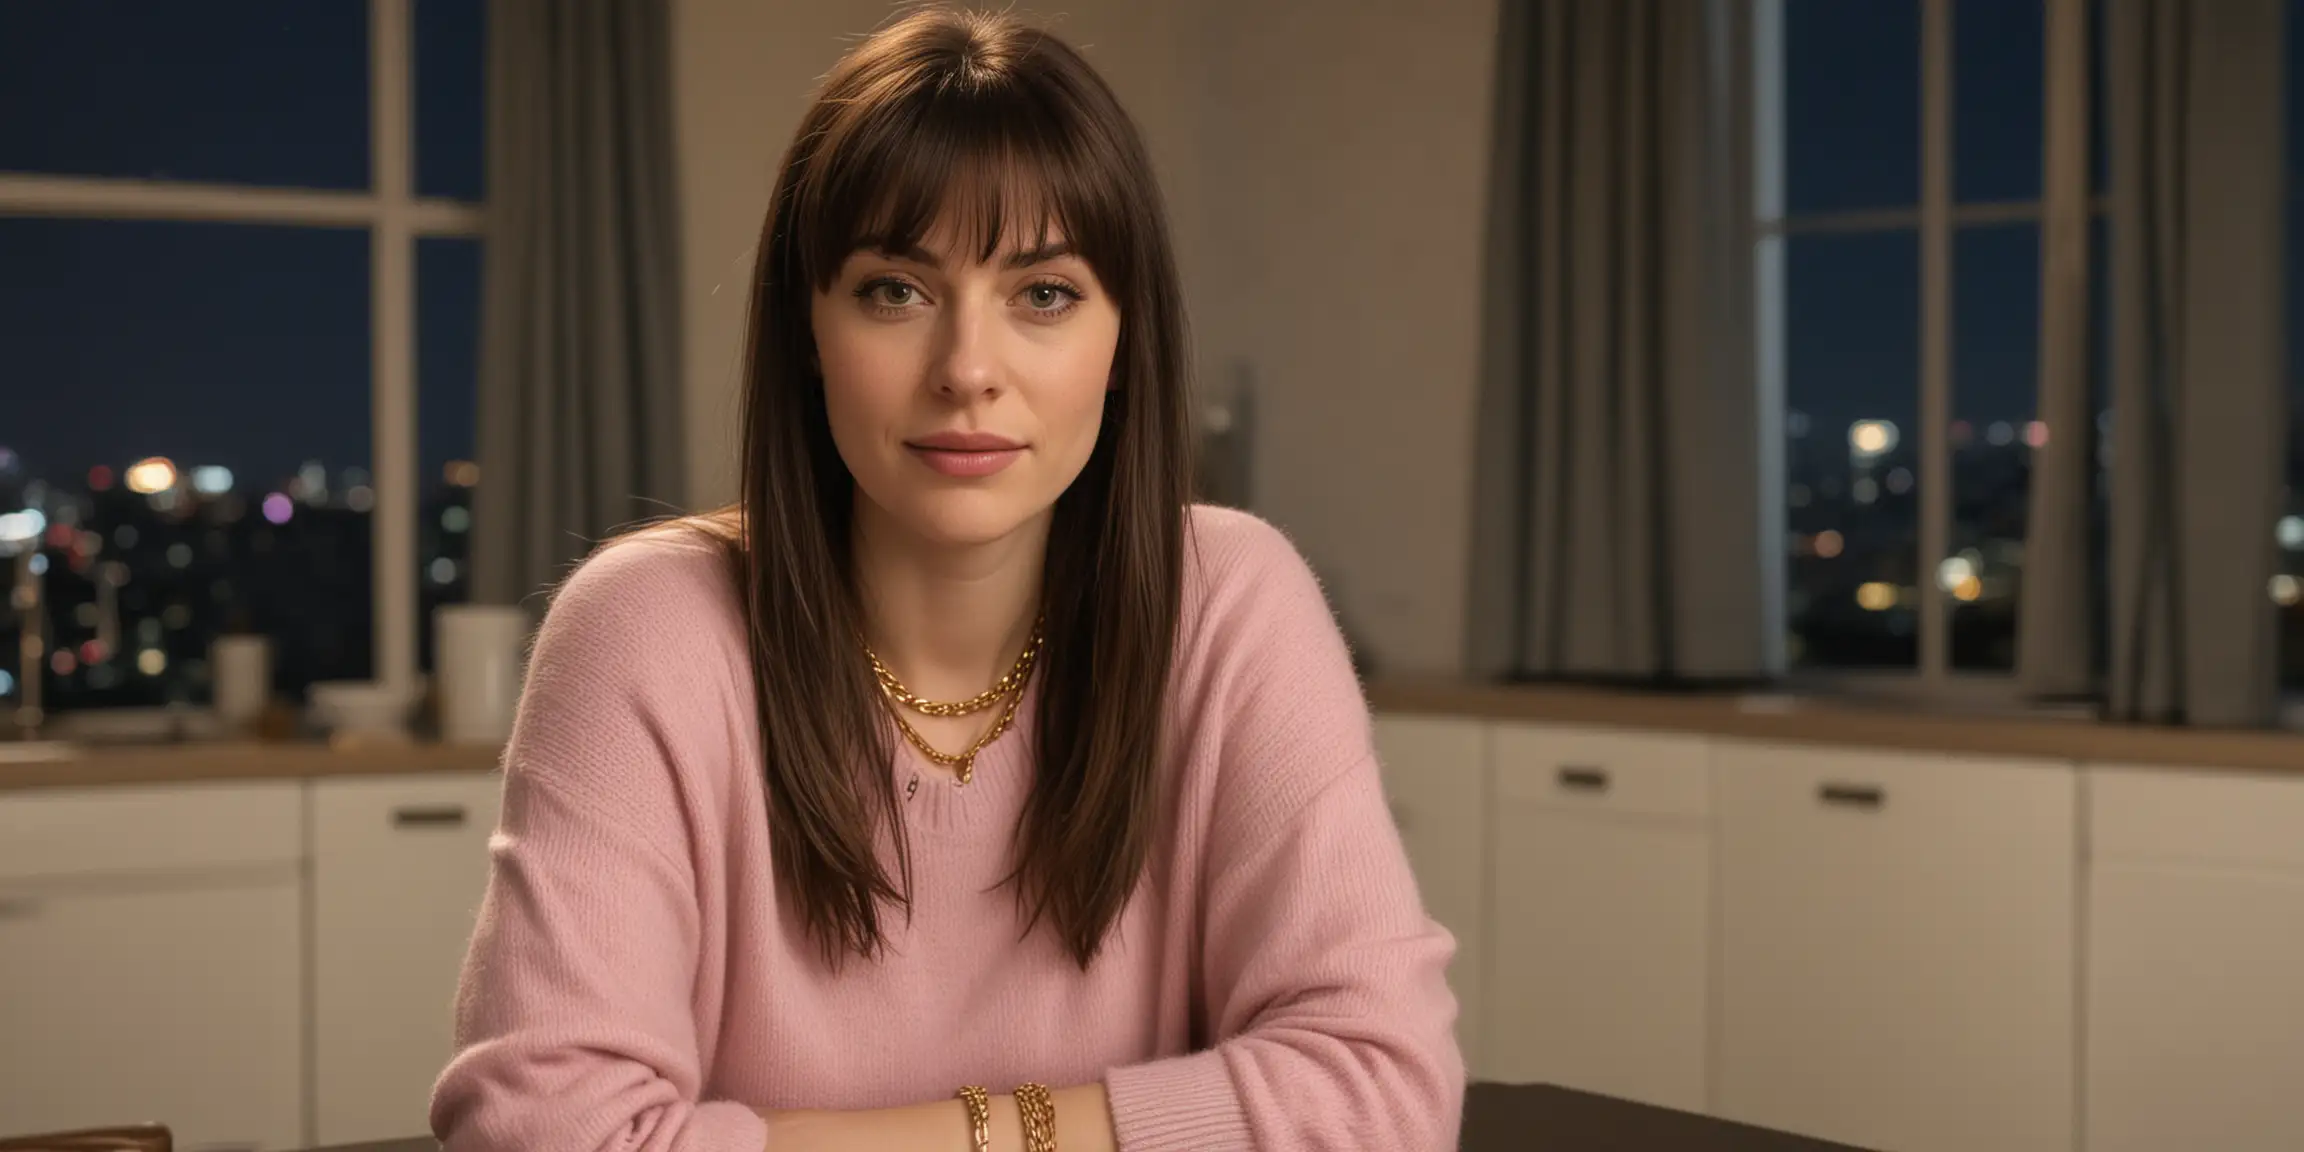 Sitting at a kitchen table at night, 30 year old pale white woman, long dark brown bangs, gold necklace. She is wearing a pink sweater and blue jeans, urban high rise background